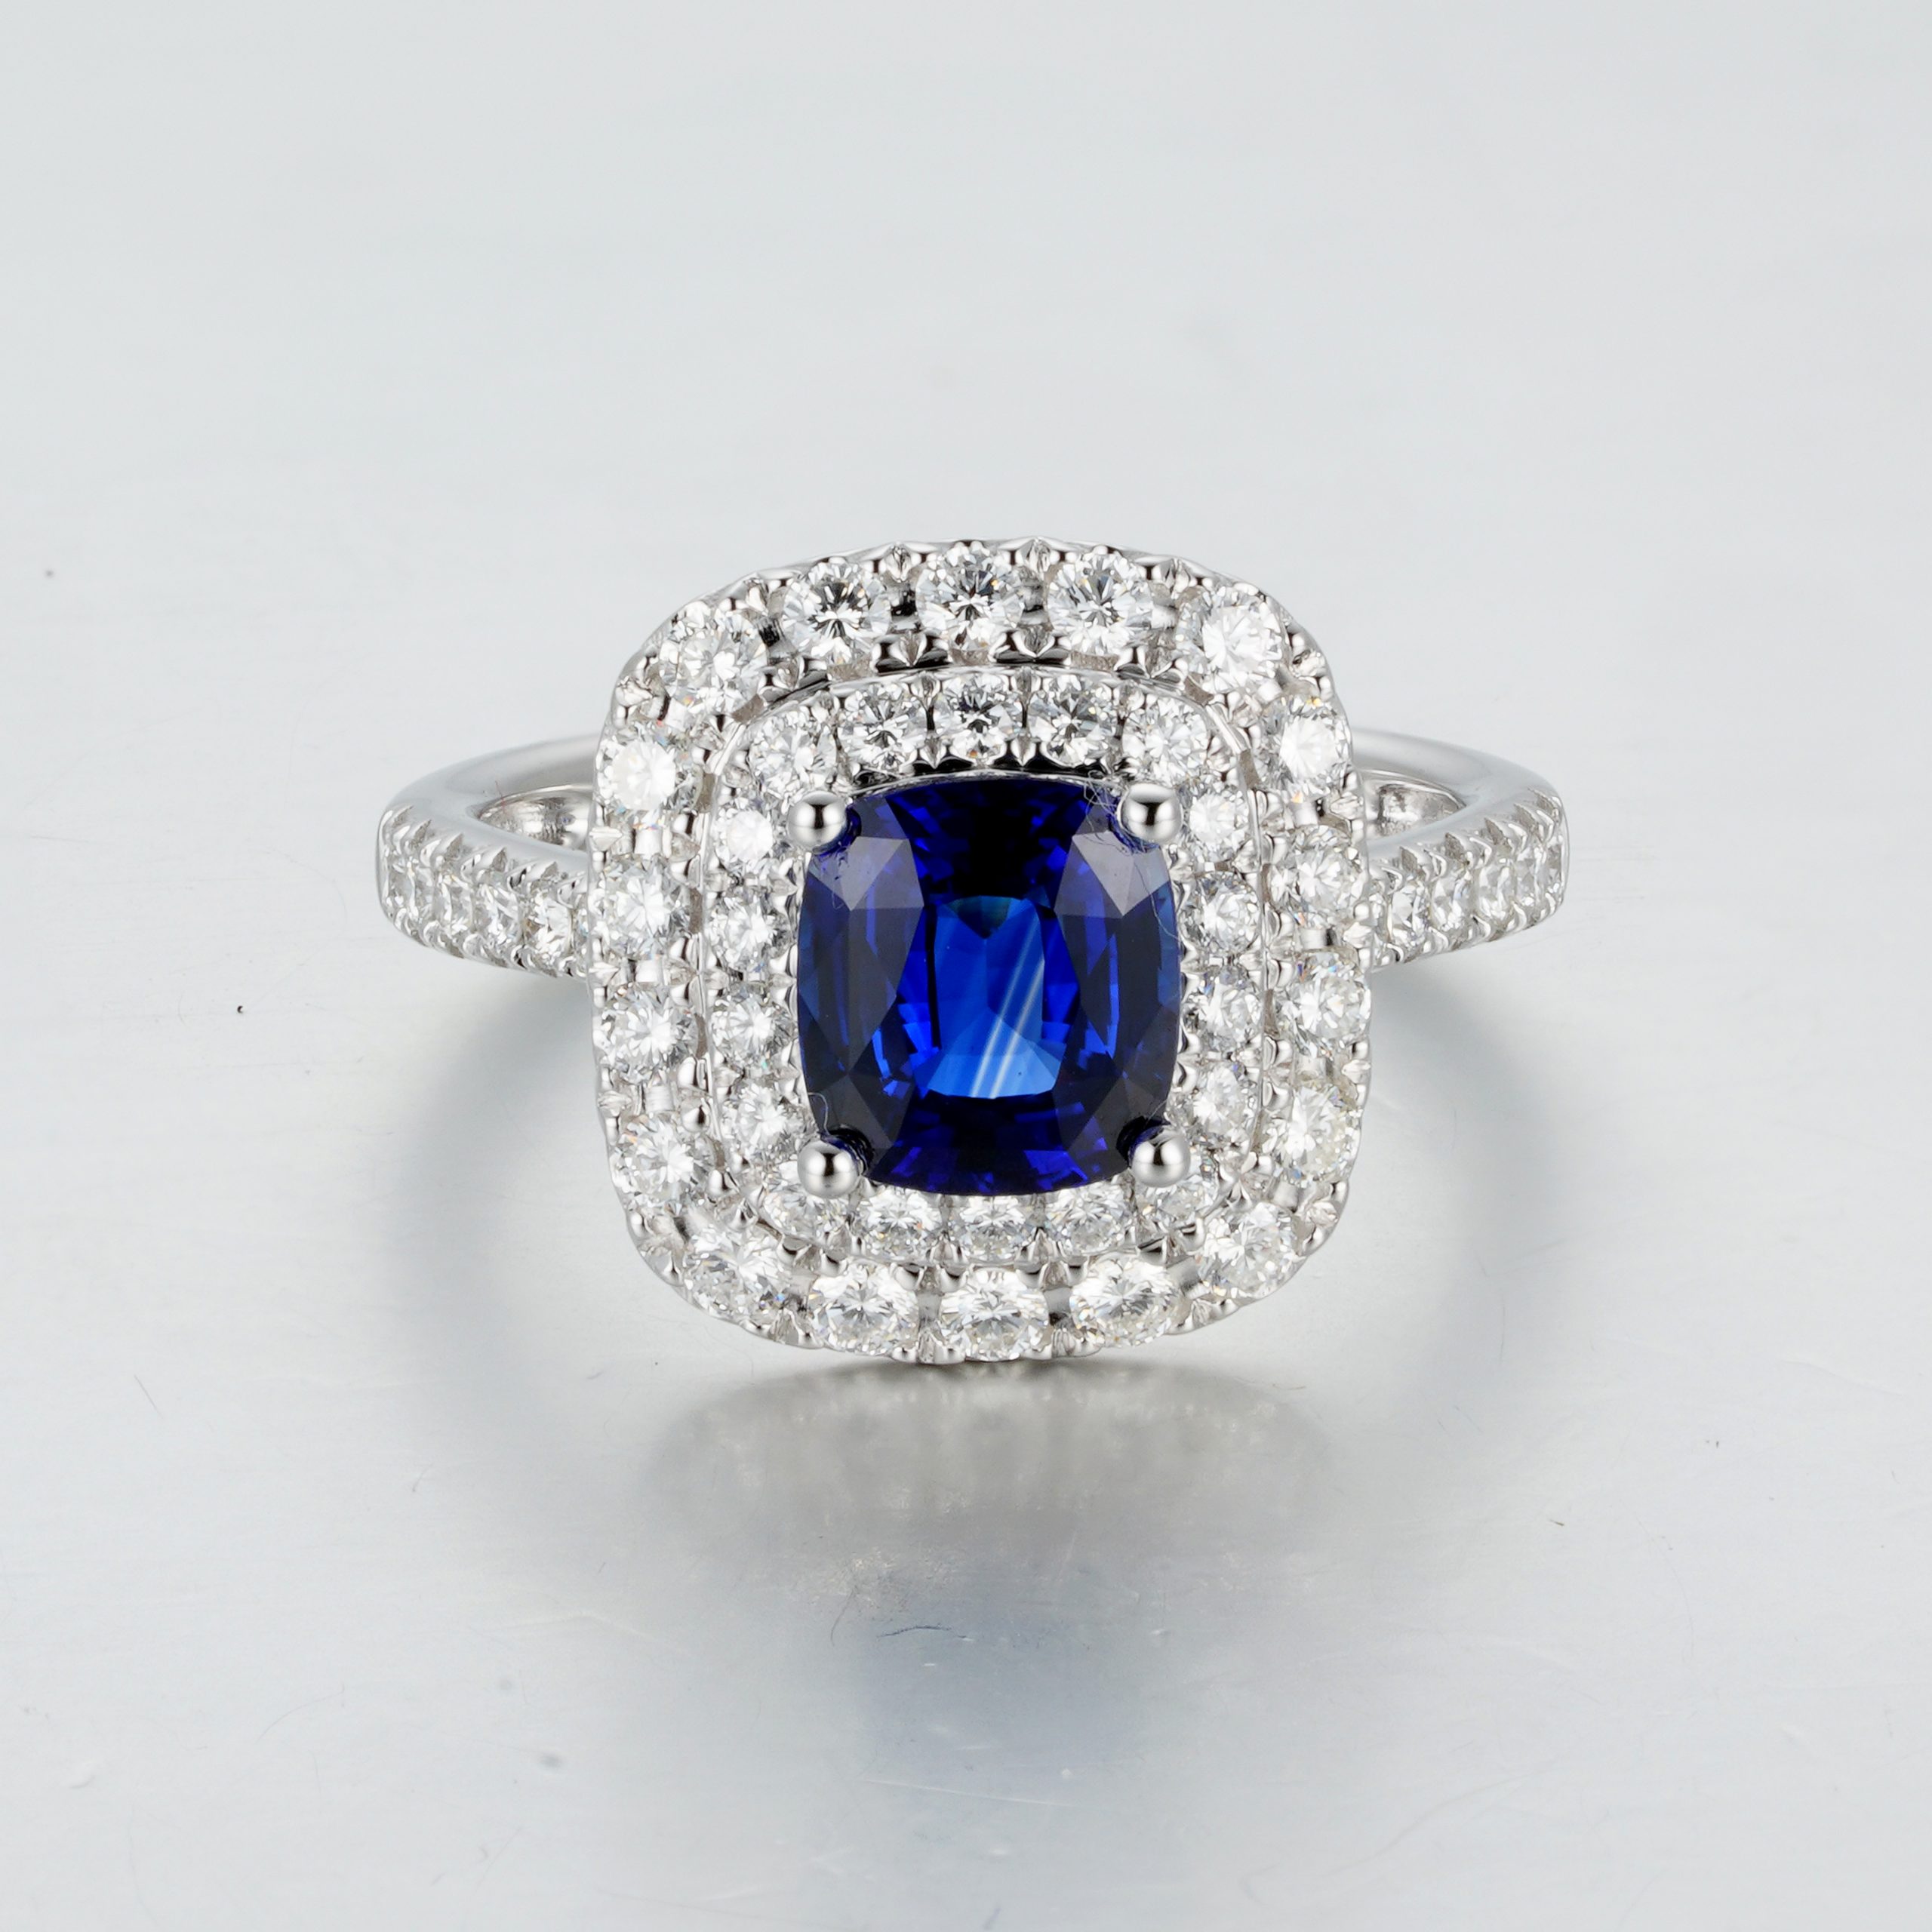 Blue Sapphire Ring with Diamonds